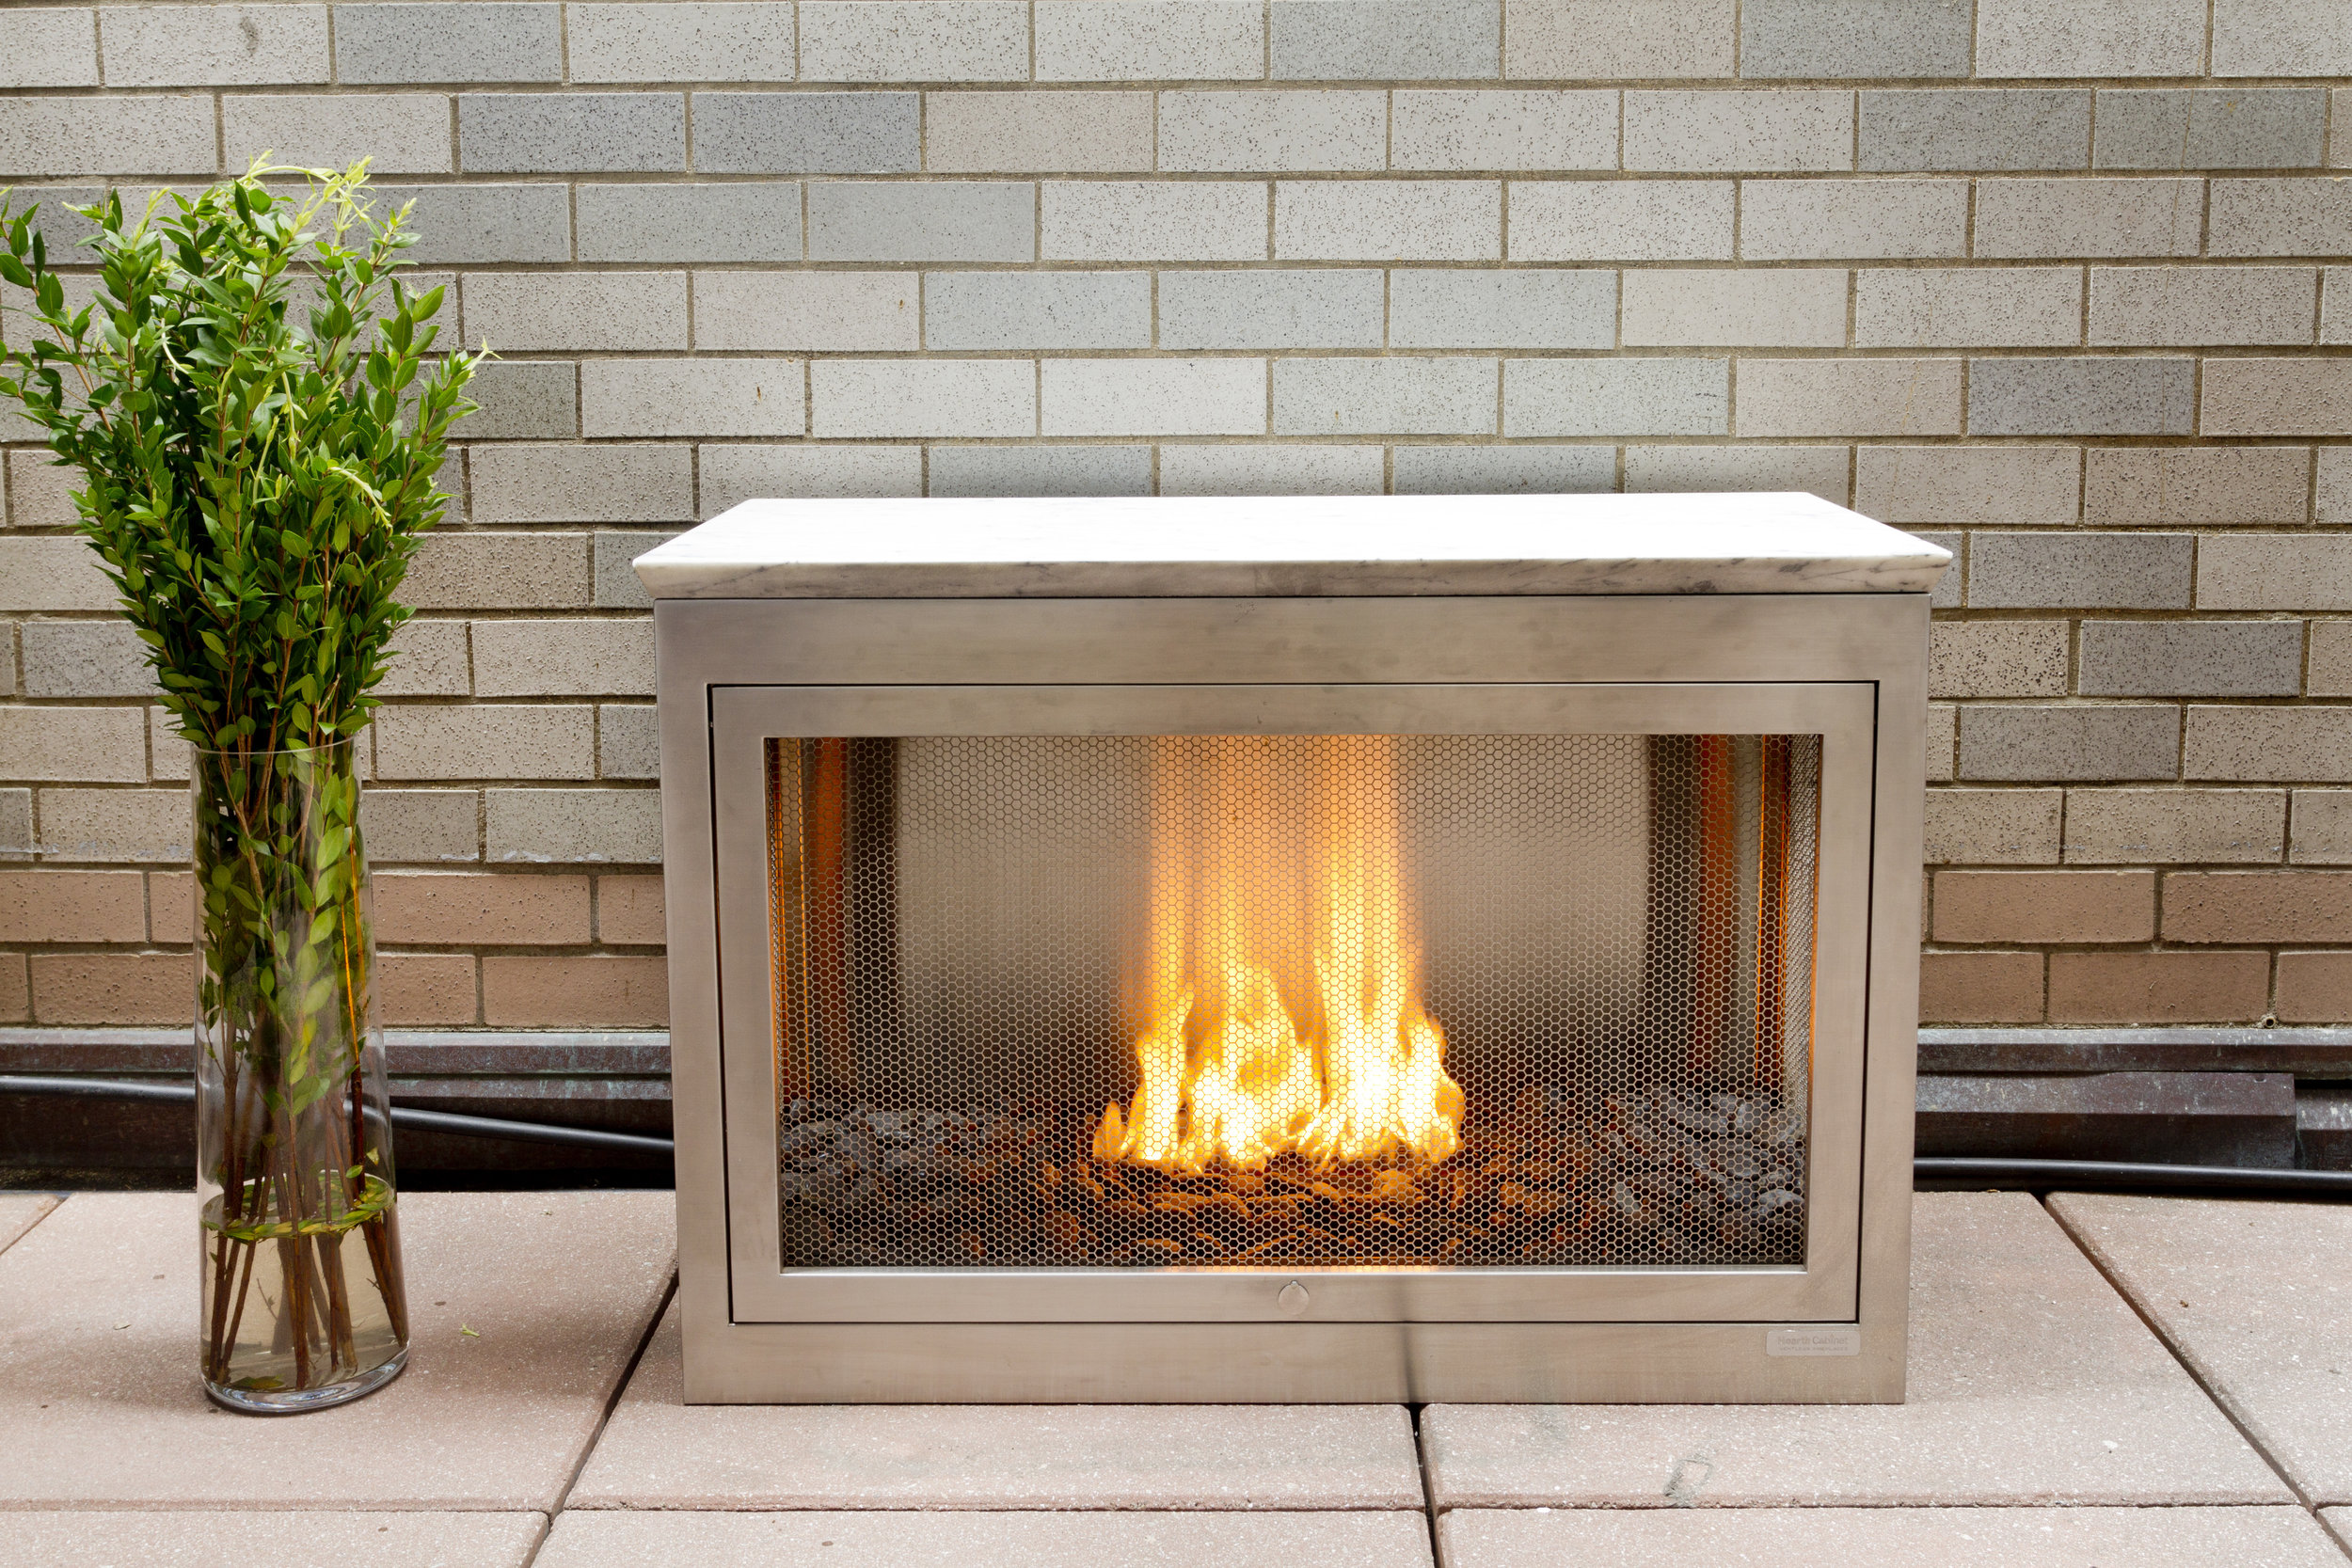  3-sided Landscape HearthCabinet Ventless Fireplace, finished in stainless steel 